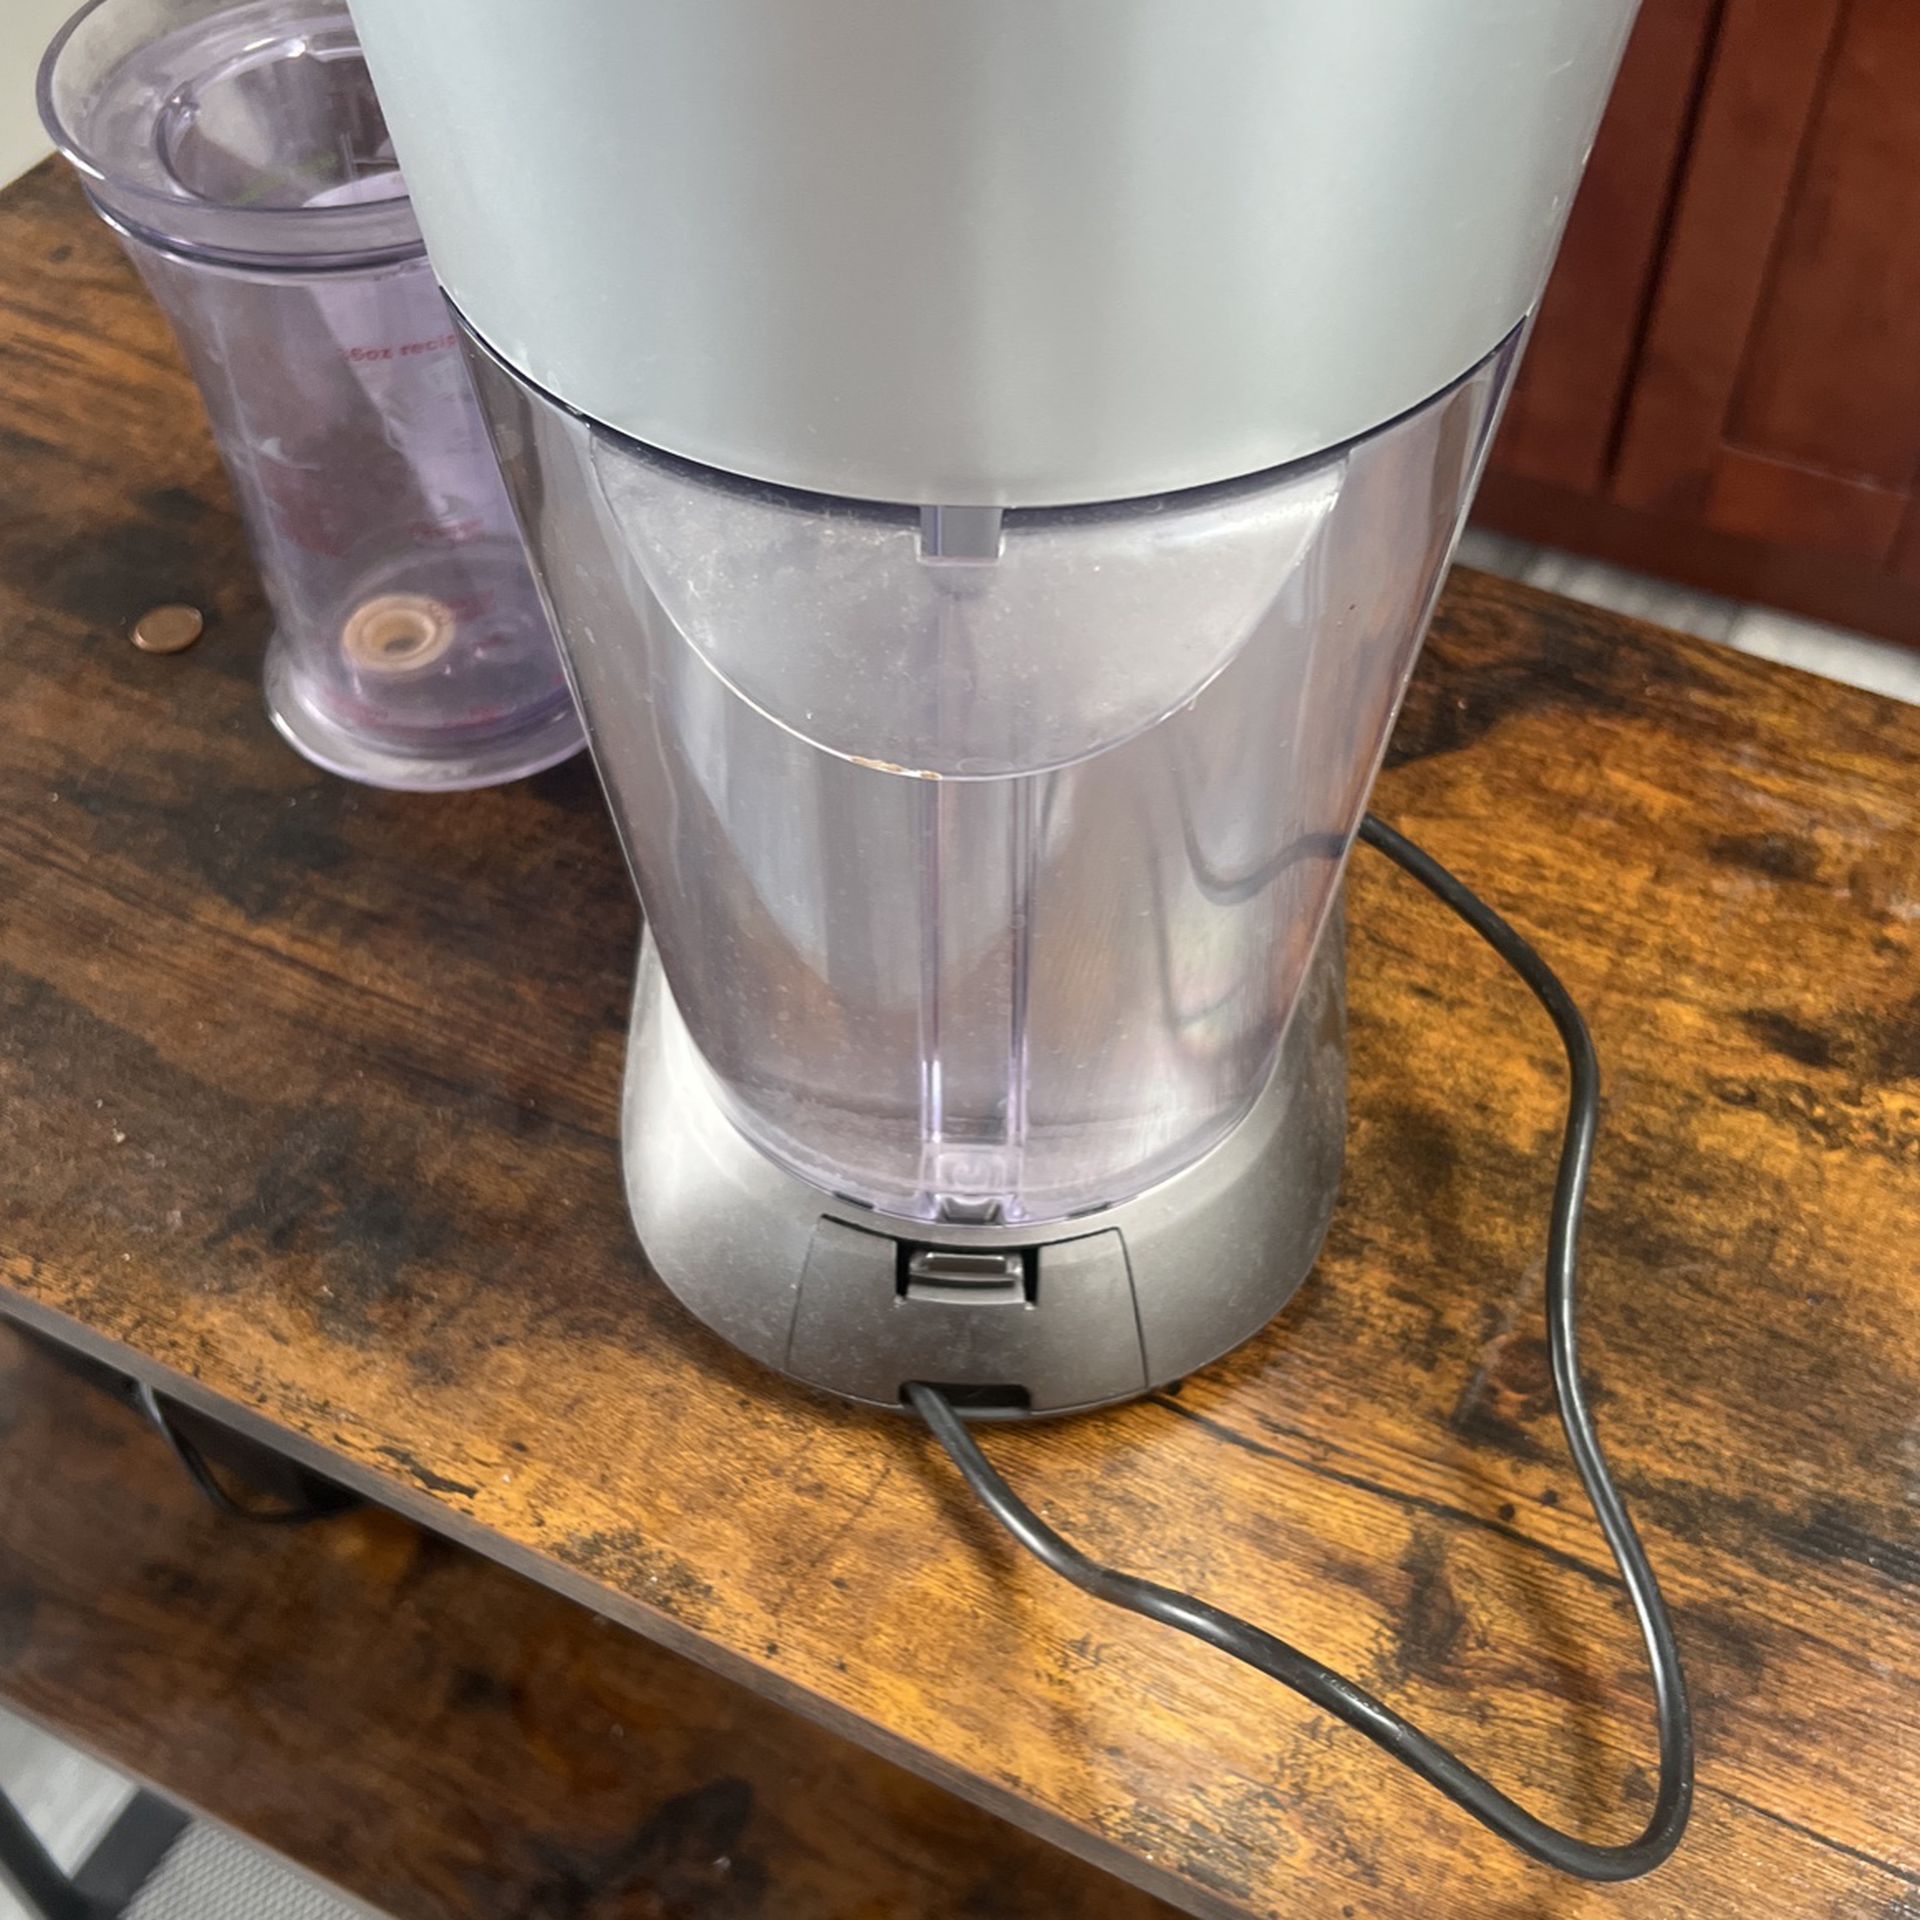 Margaritaville Mixed Drink Maker for Sale in Tomball, TX - OfferUp